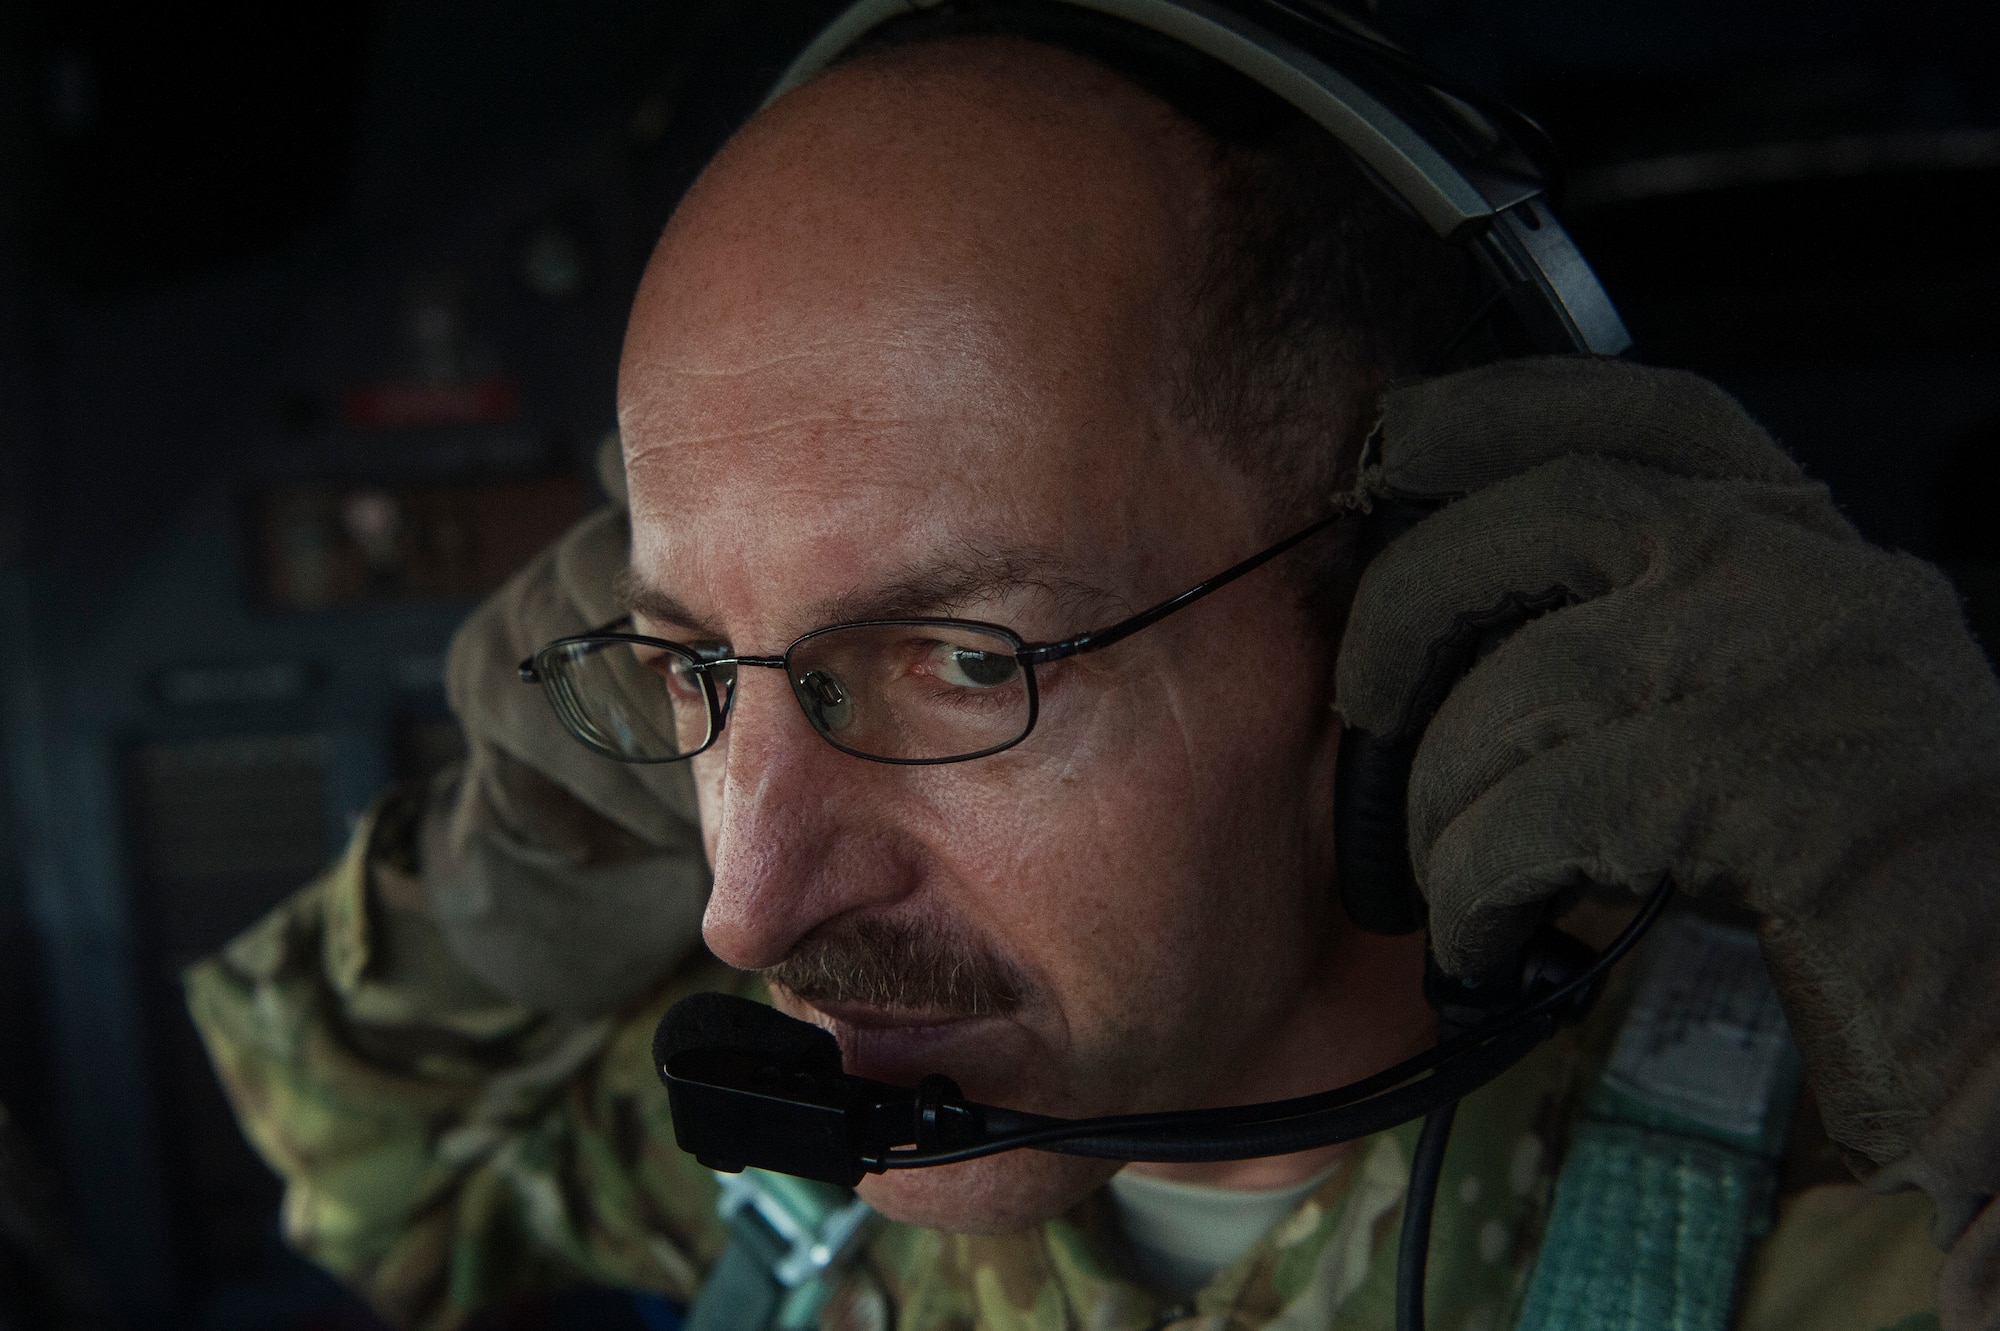 U.S. Air Force Chief Master Sgt. Kenneth Kunkel, 746th Expeditionary Airlift Squadron C-130 Hercules flight engineer, checks his headset during a C-130 Hercules pre-flight inspection Nov. 13, 2018, at Al Udeid Air Base, Qatar. Kunkel reached 10,000 flying hours Oct. 6, 2018, a number considered prestigious amongst military aviators. (U.S. Air Force photo by Tech. Sgt. Christopher Hubenthal)